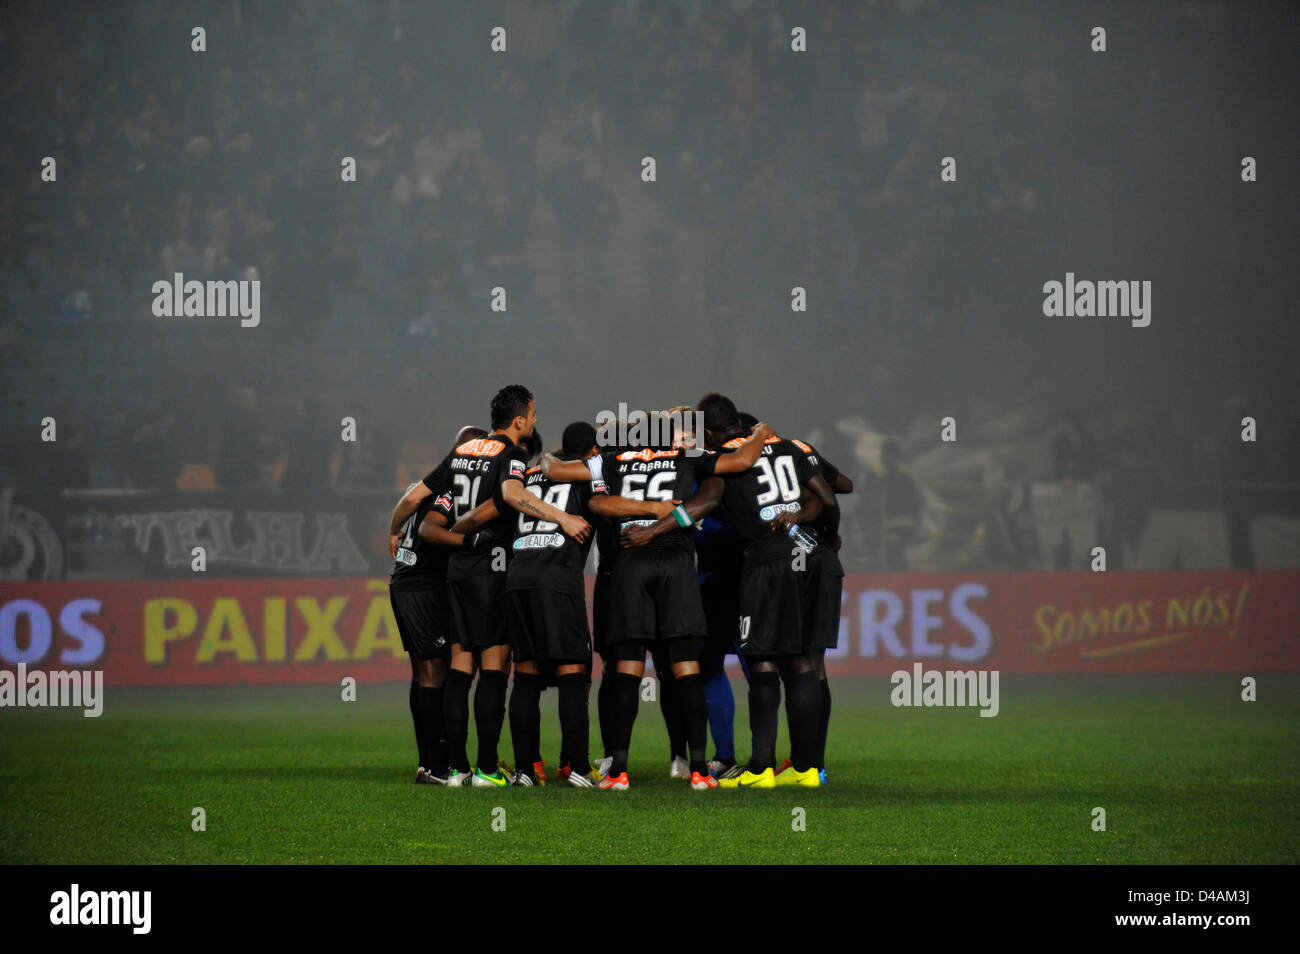 Football players huddle up before a match Stock Photo